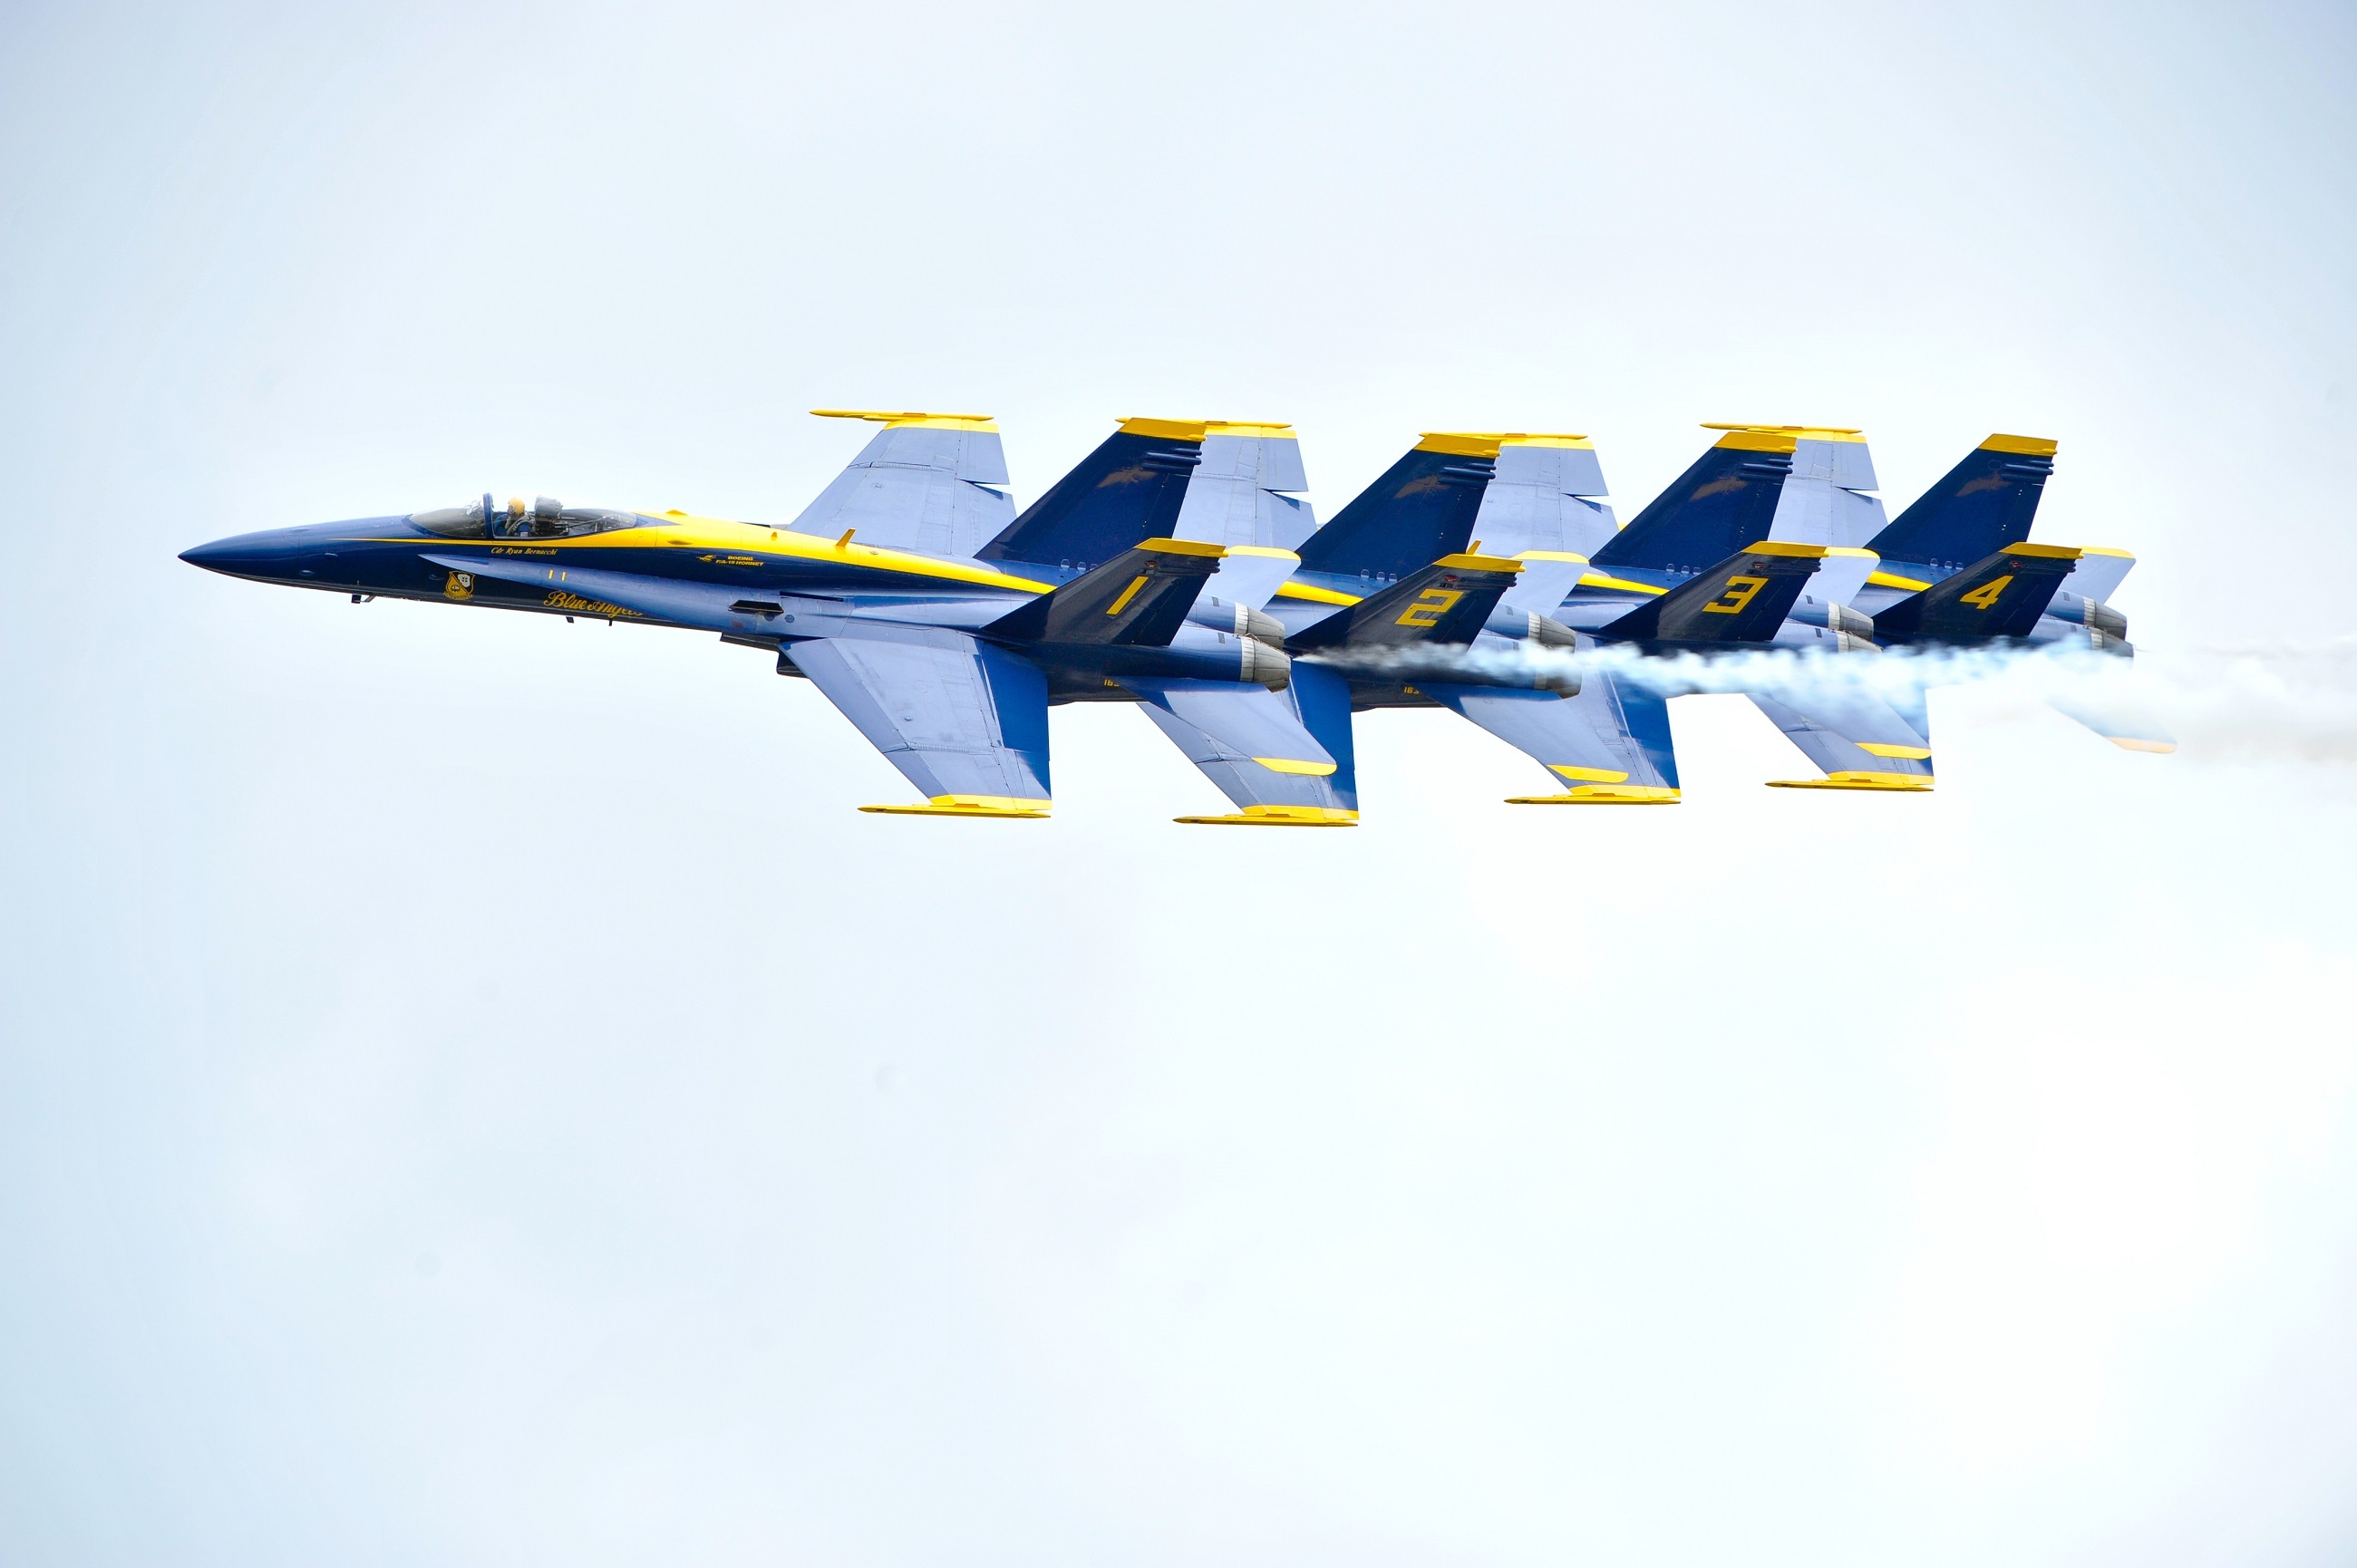 military, air show, aircraft, blue angels, jet fighter, mcdonnell douglas f/a 18 hornet, navy, military aircraft